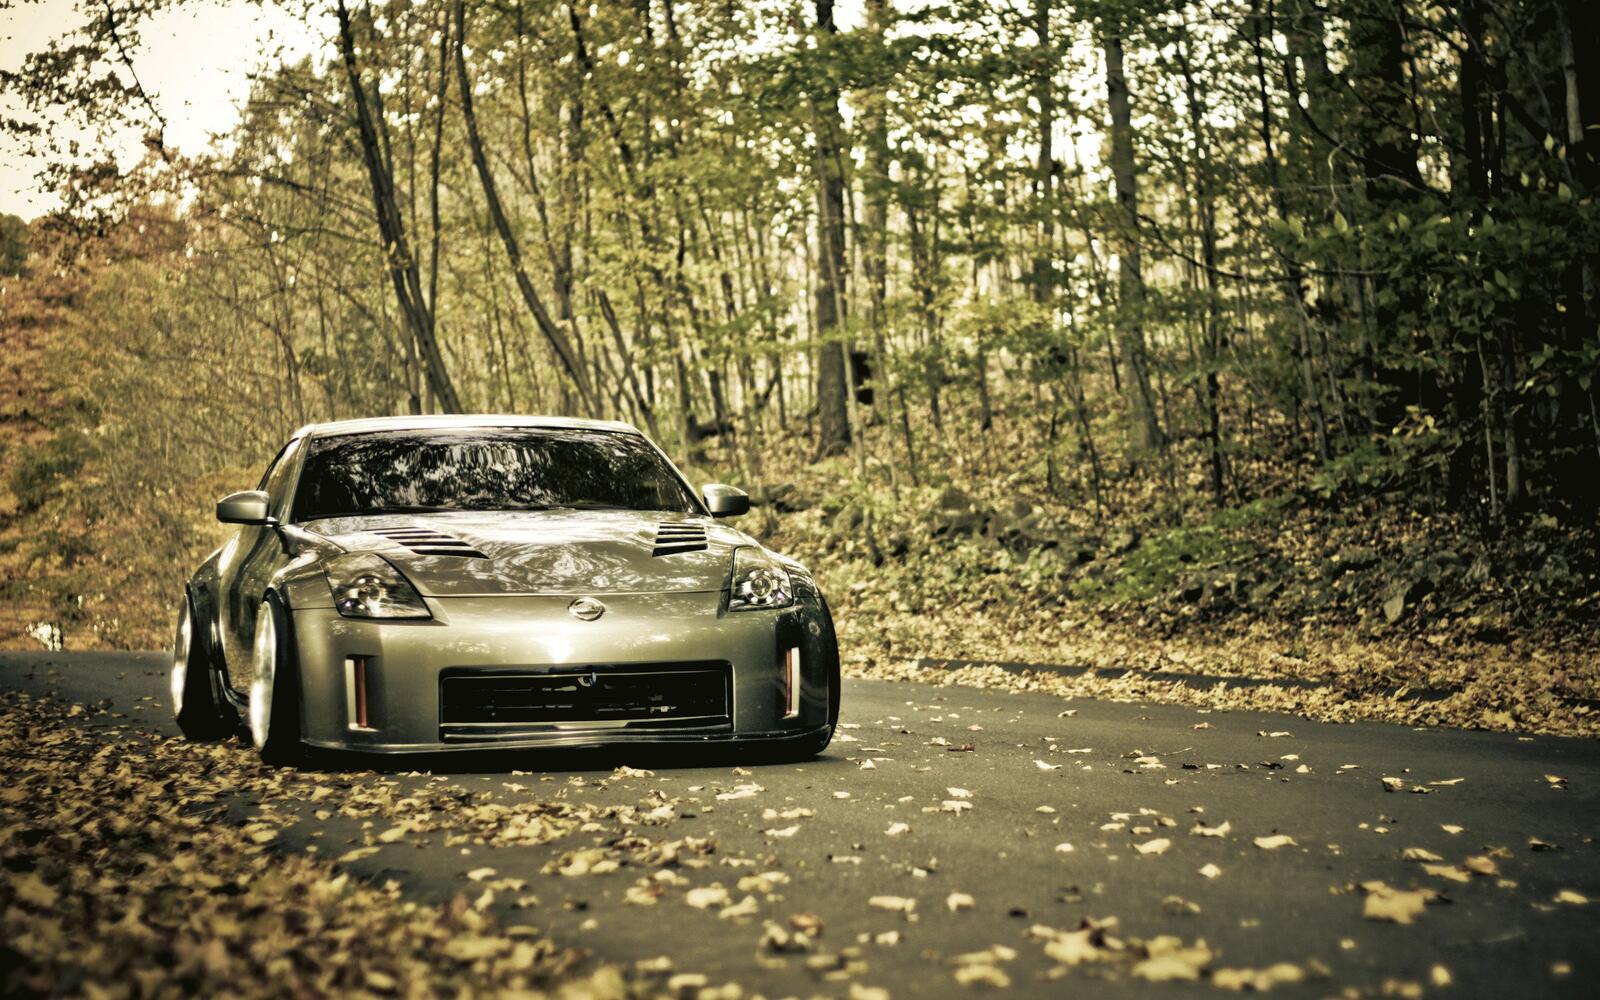 Free photo Nissan 350z on fall leaves.